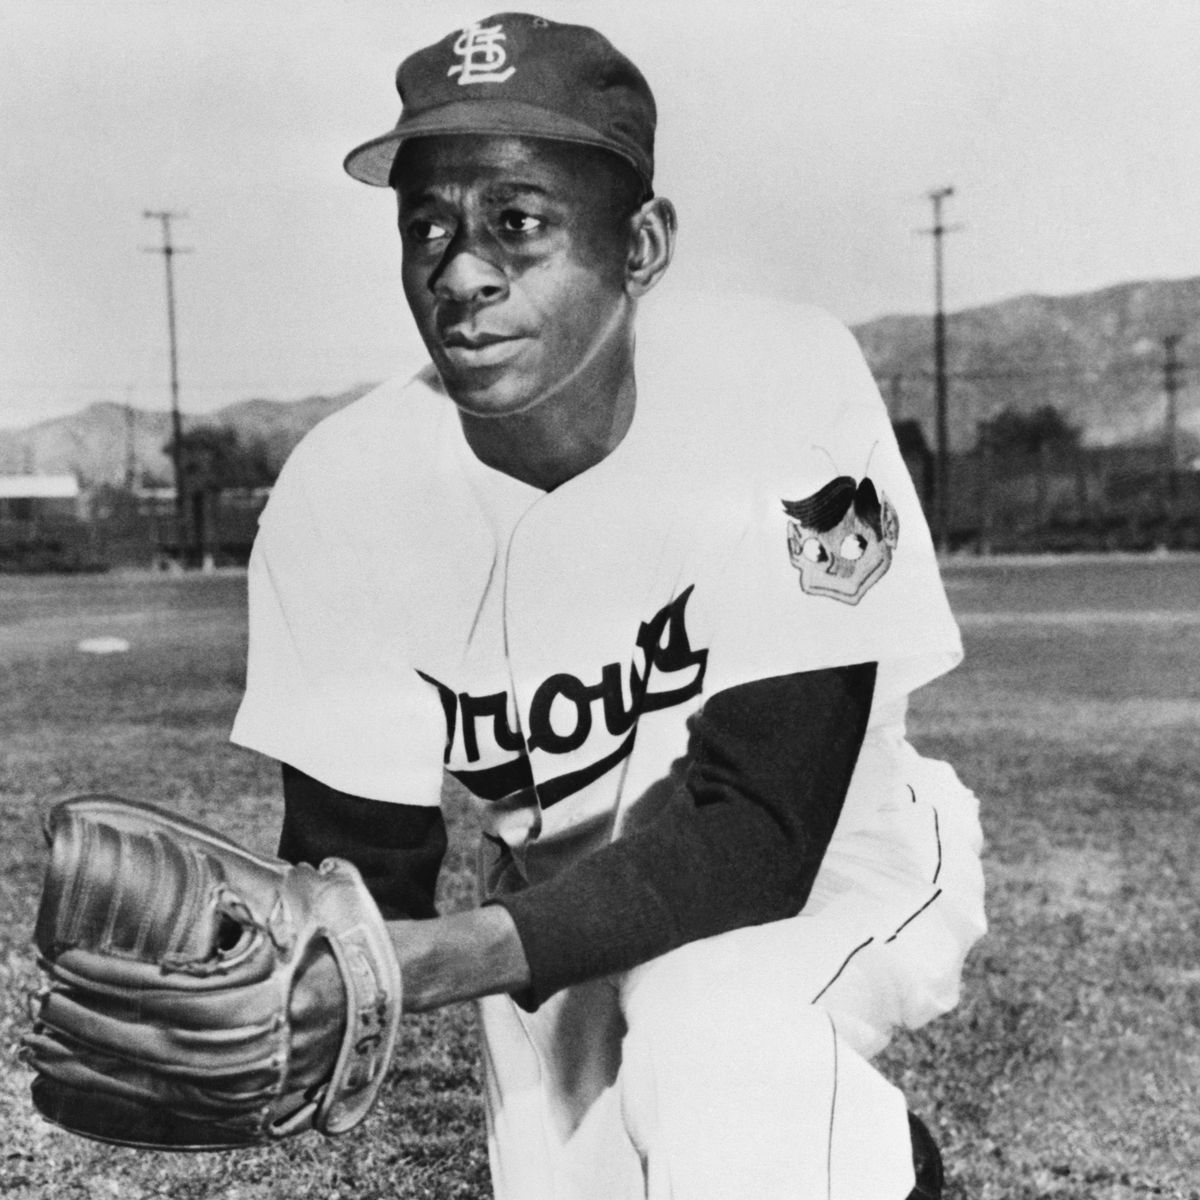 Satchel Paige was one of baseball's best pitchers long before